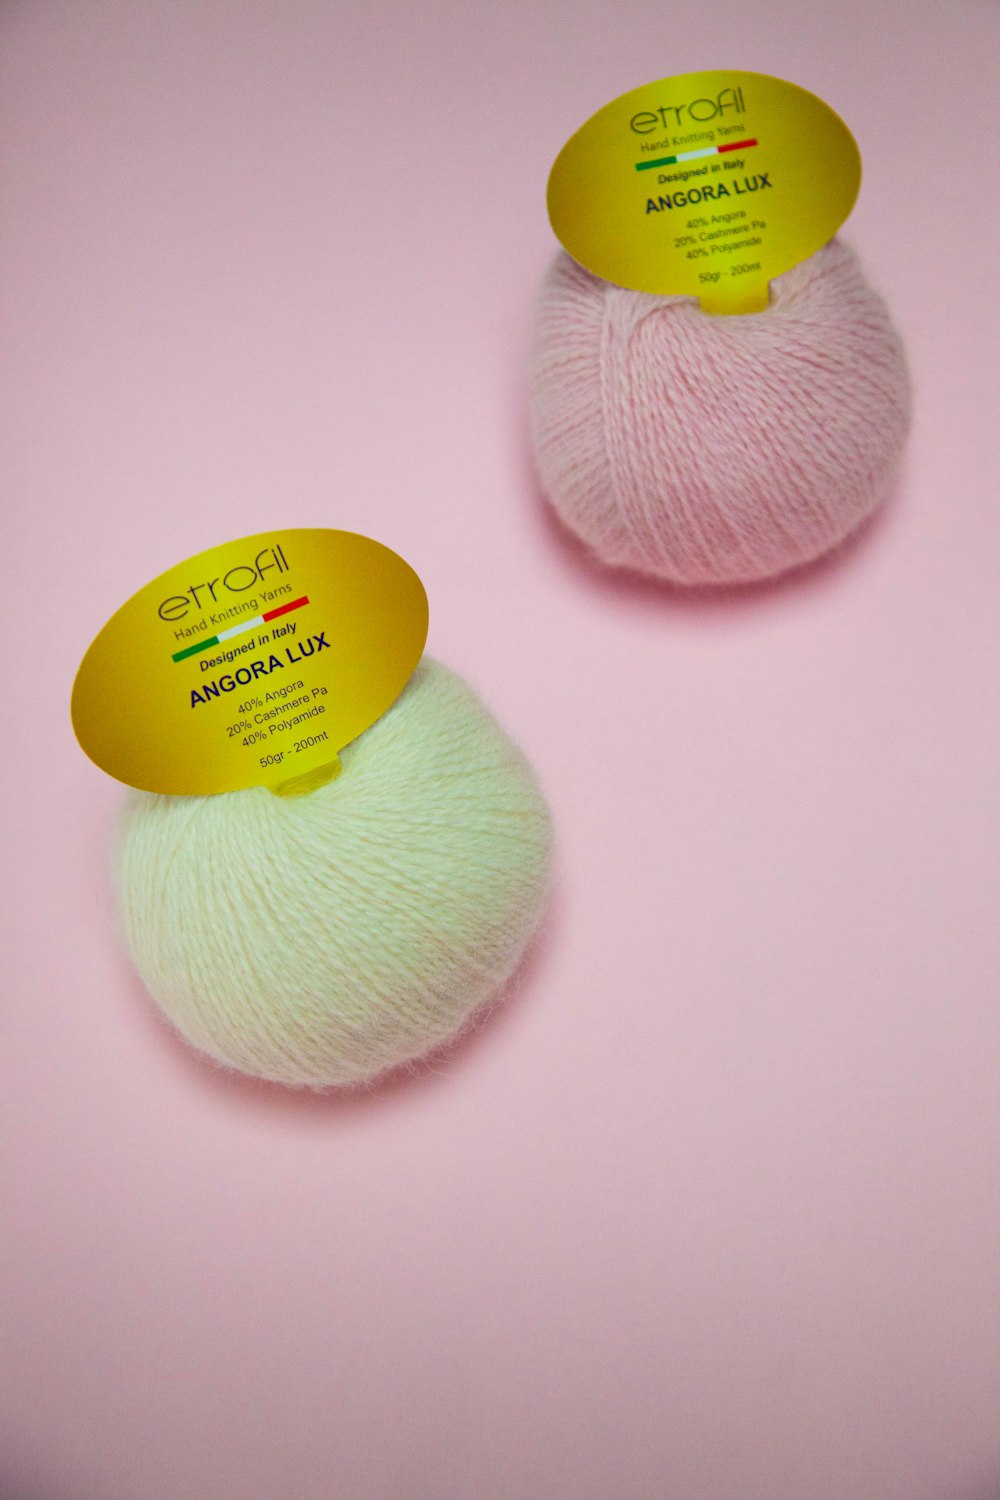 two white and pink Angora Lux yarn balls